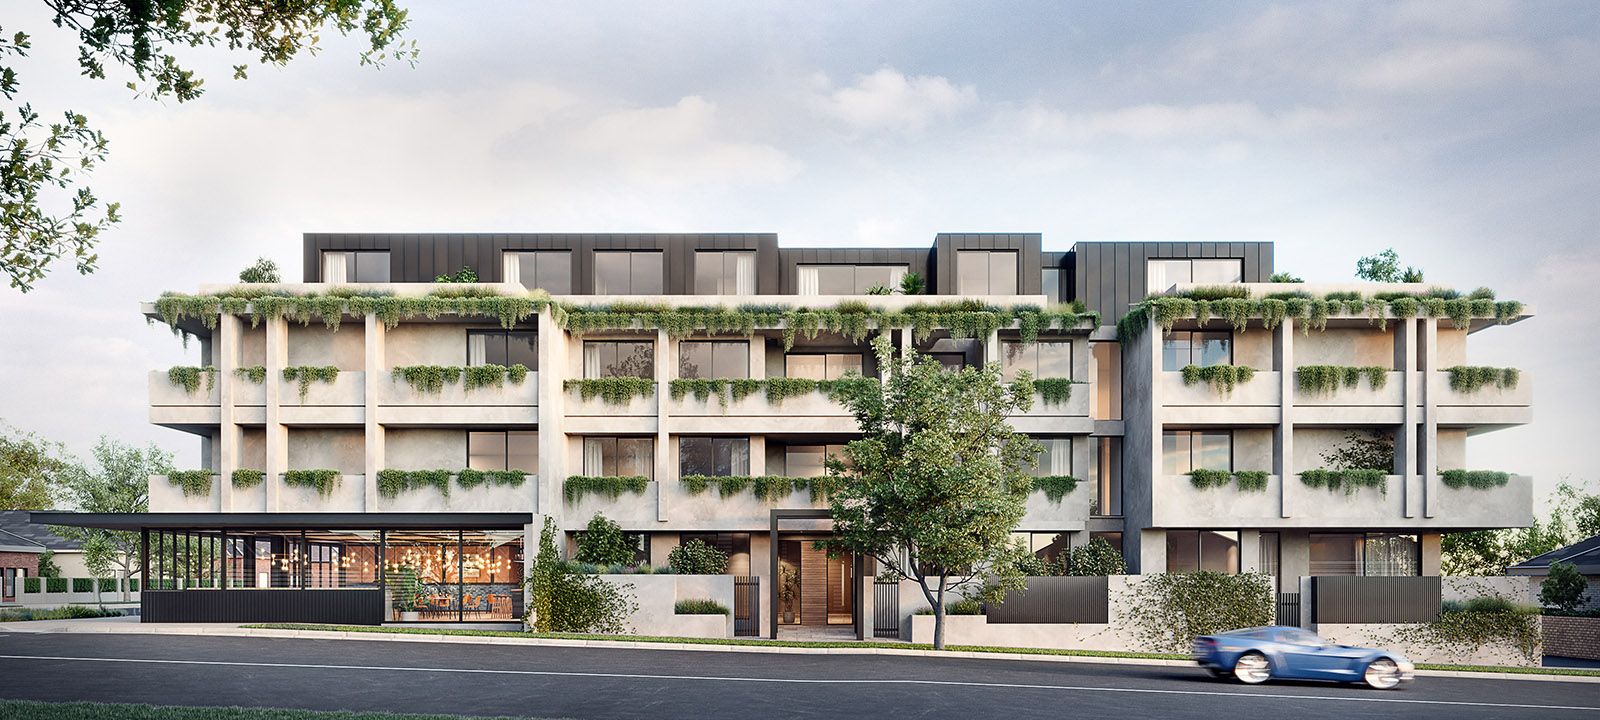 1 bedrooms New Apartments / Off the Plan in G.01/216-226 Charman Road CHELTENHAM VIC, 3192